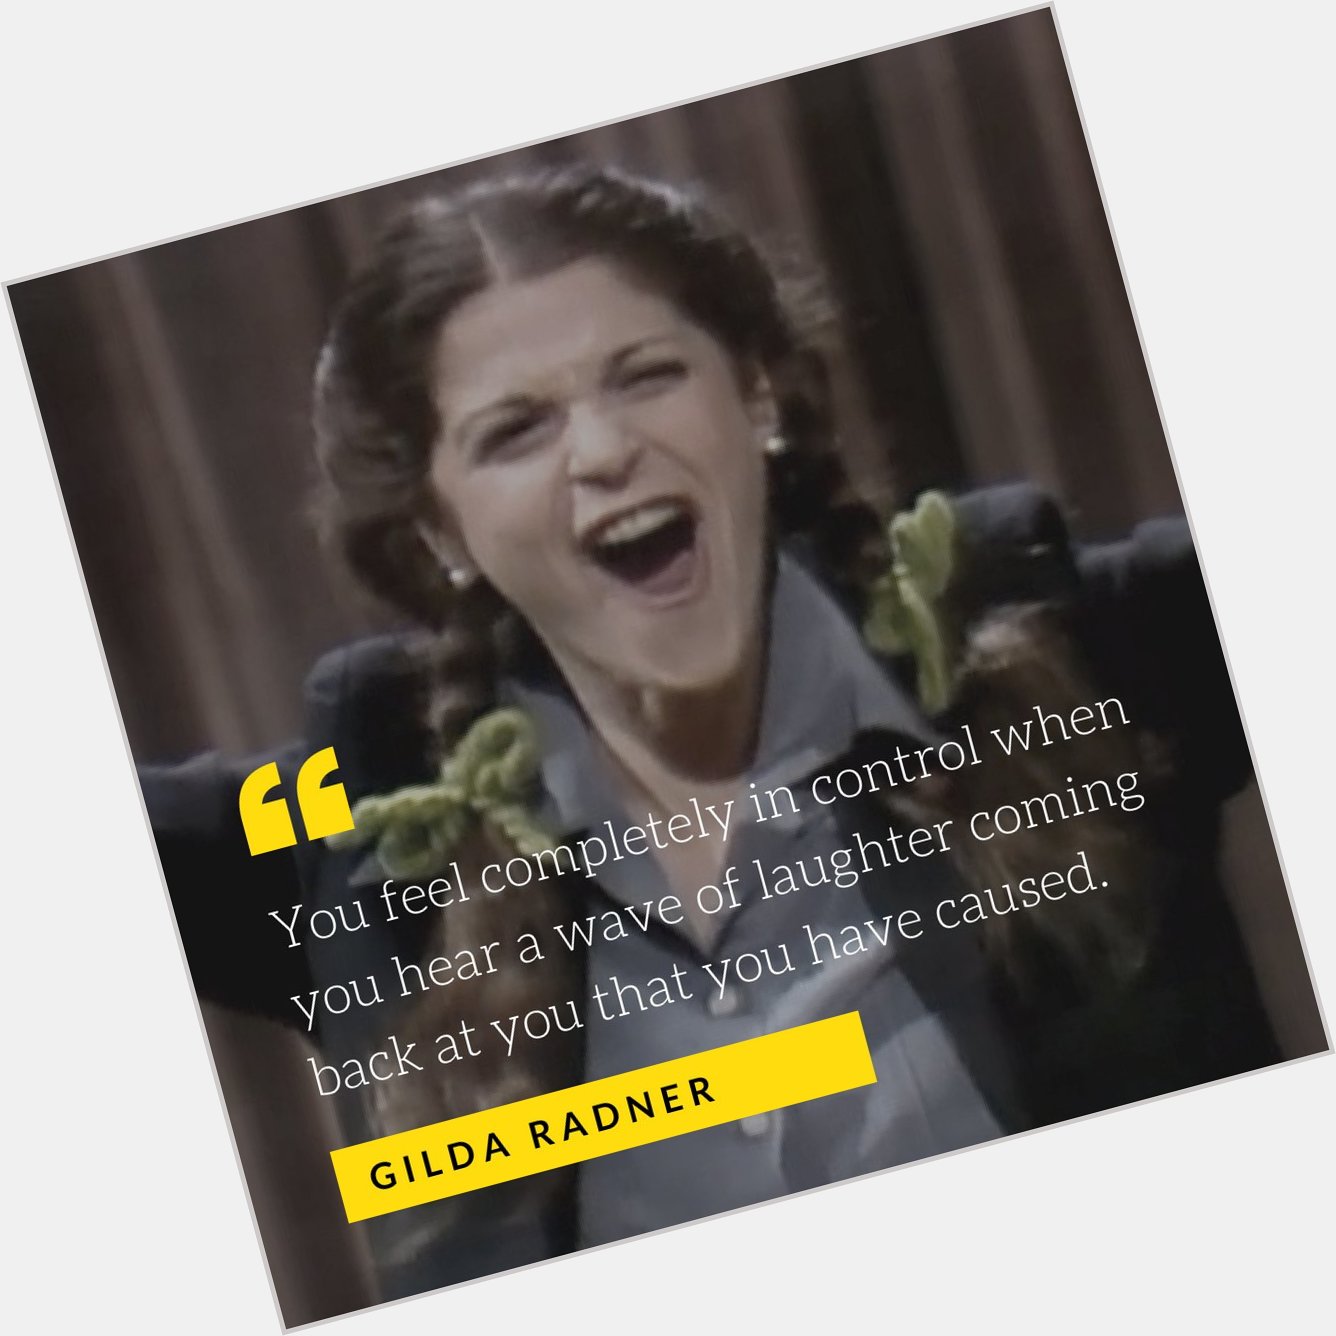 Happy Birthday, Gilda Radner! We aspire to carry on your spirit each and every day. 